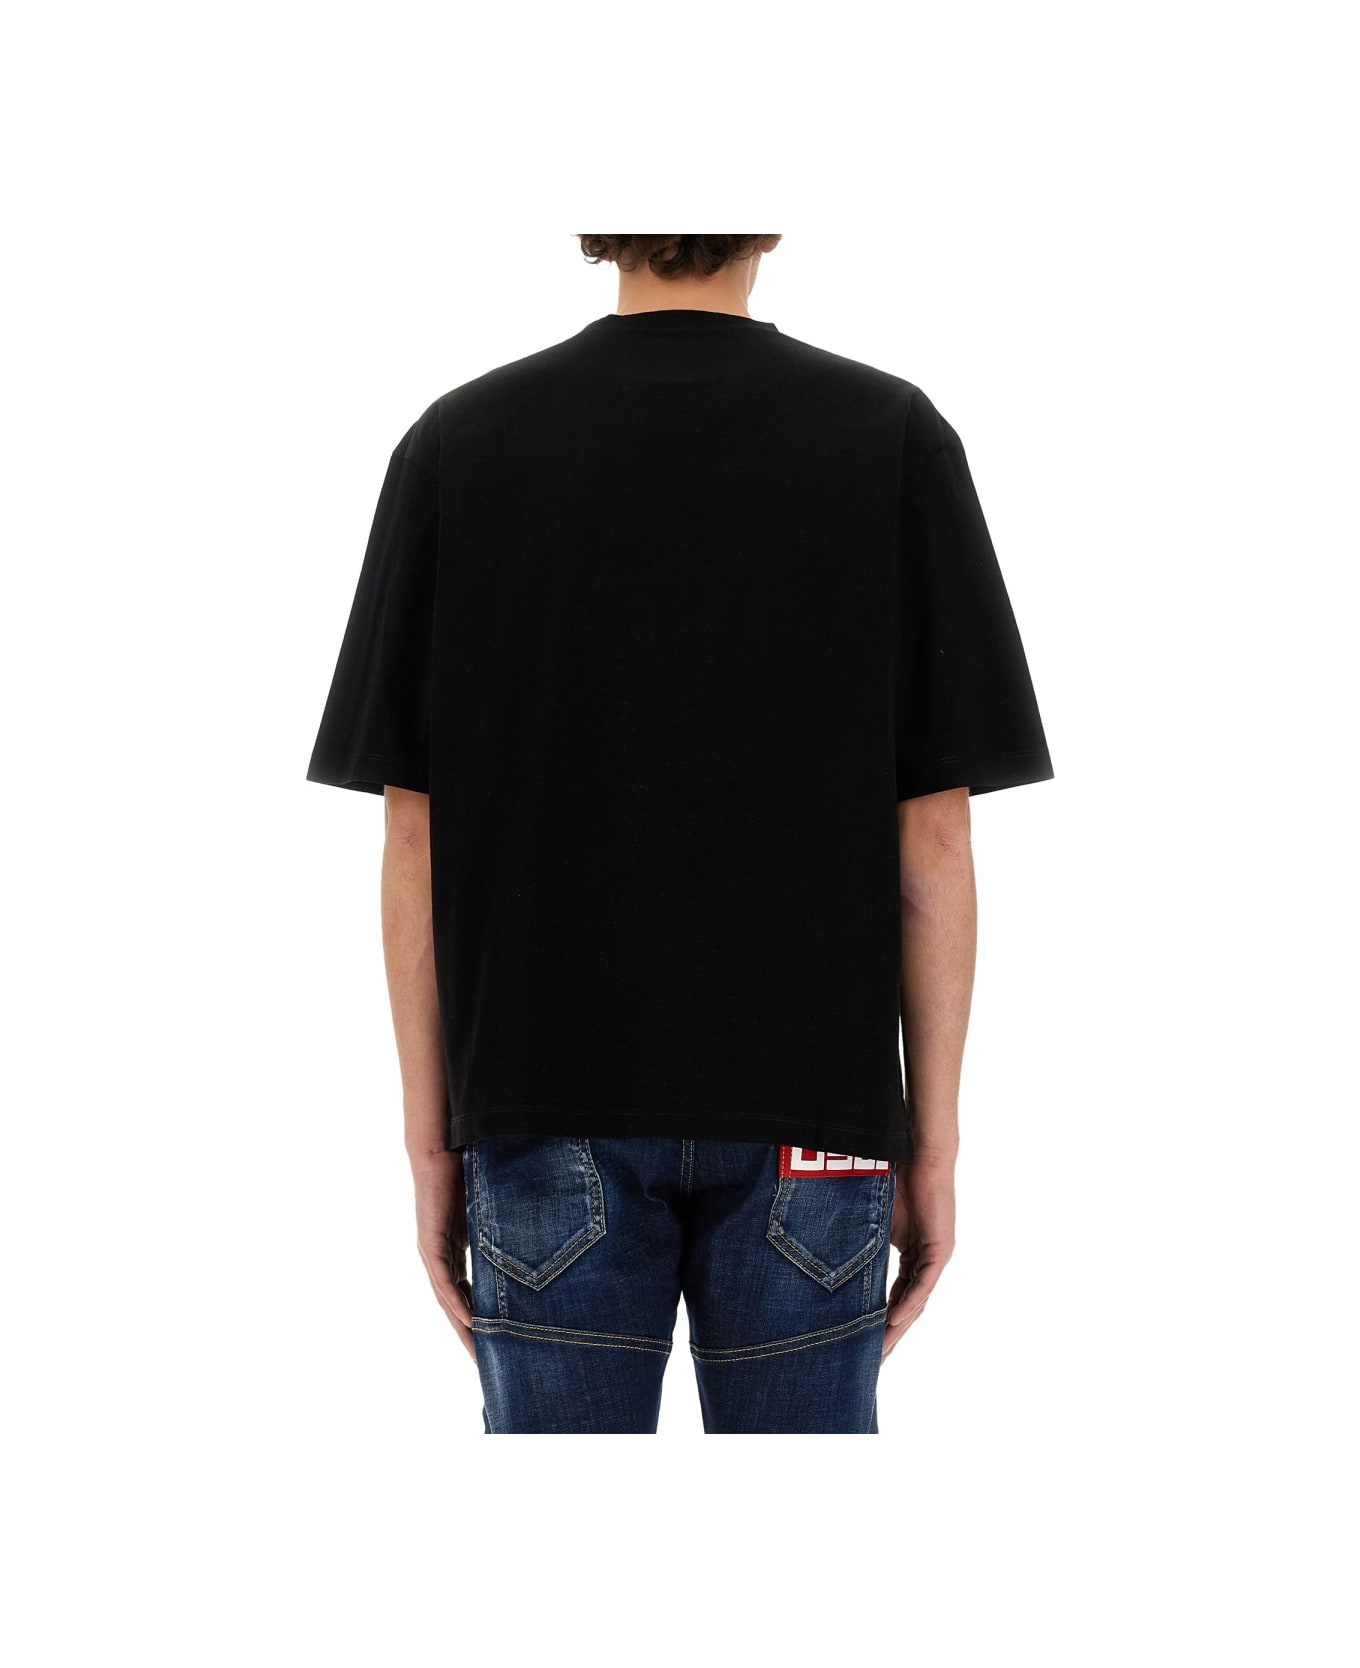 Dsquared2 Canadian Team Cool Fit T-shirt - Black シャツ